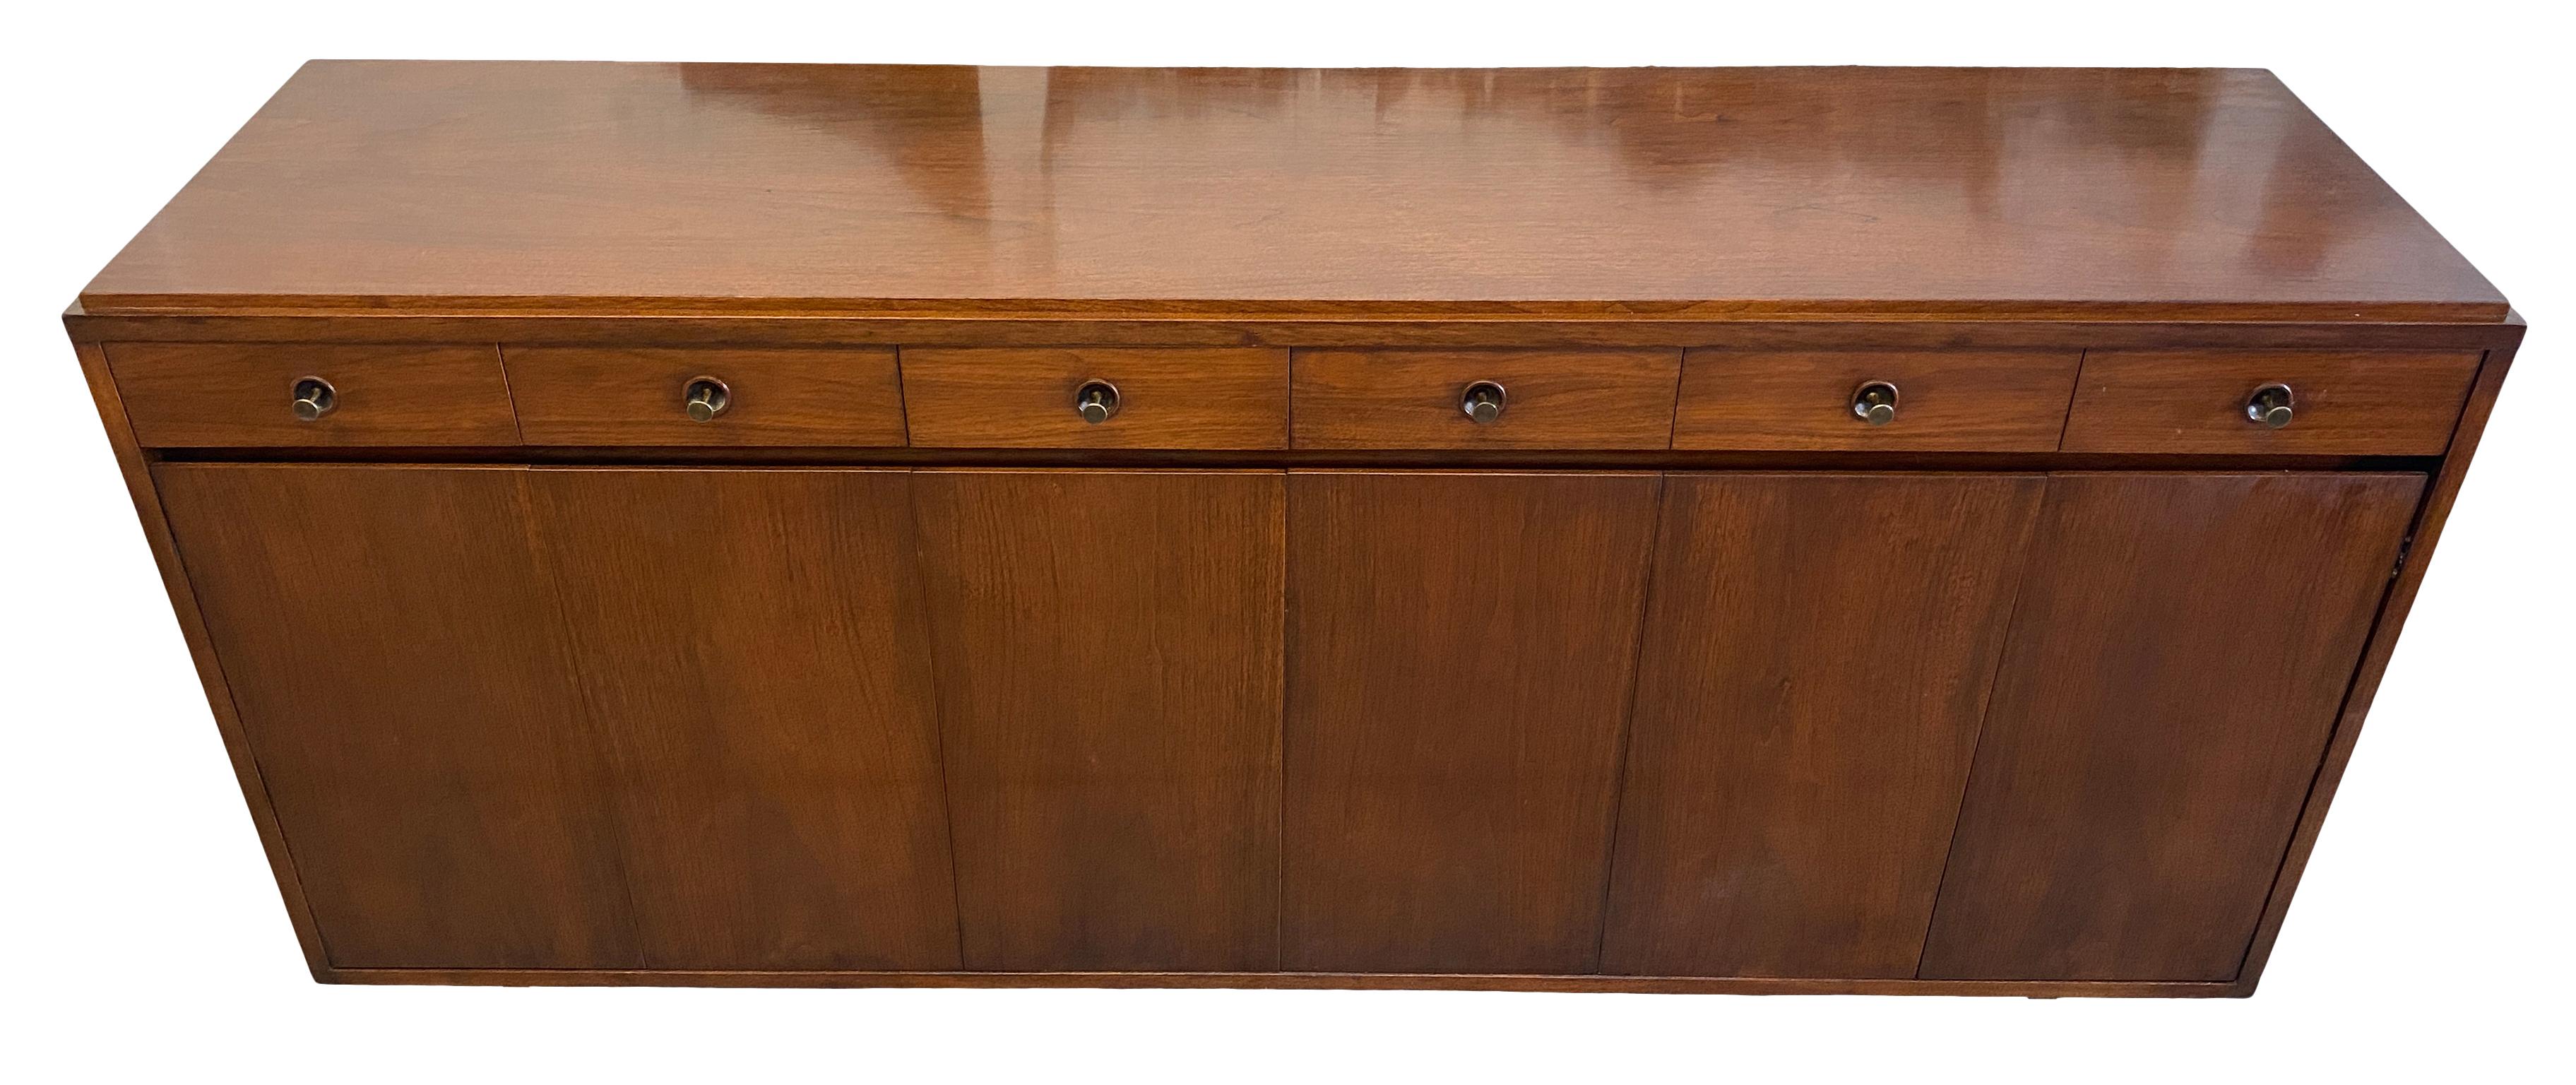 Rare midcentury American designer Paul McCobb walnut 14-drawer dresser credenza #8053. Original finish in beautiful vintage condition, has front folding walnut front accordion doors with magnets in amazing condition, all solid walnut with a dark